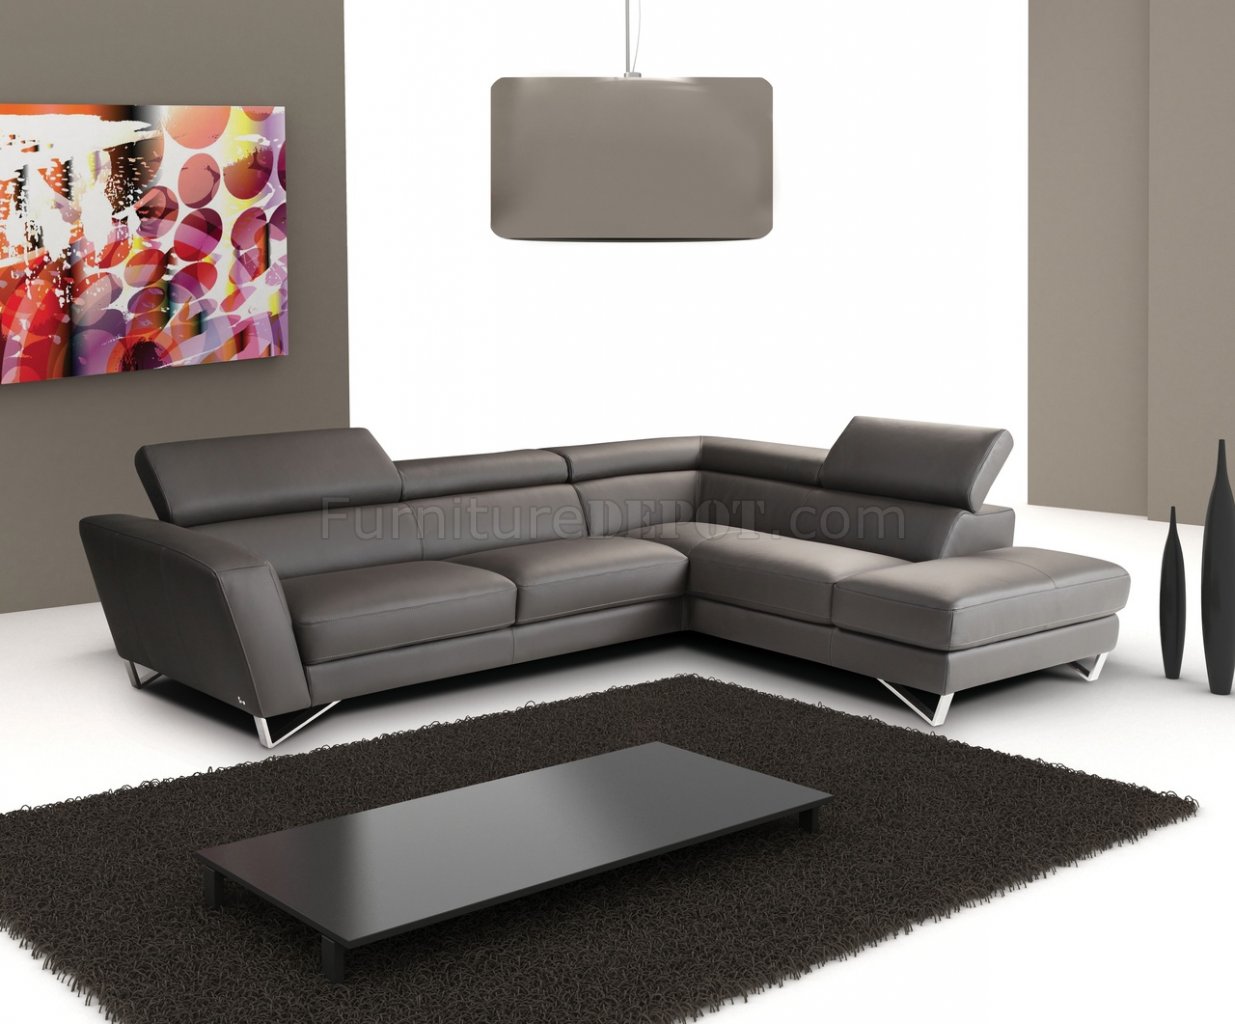 Full Leather Modern Sectional Sofa, Gray Leather Sectional Couch